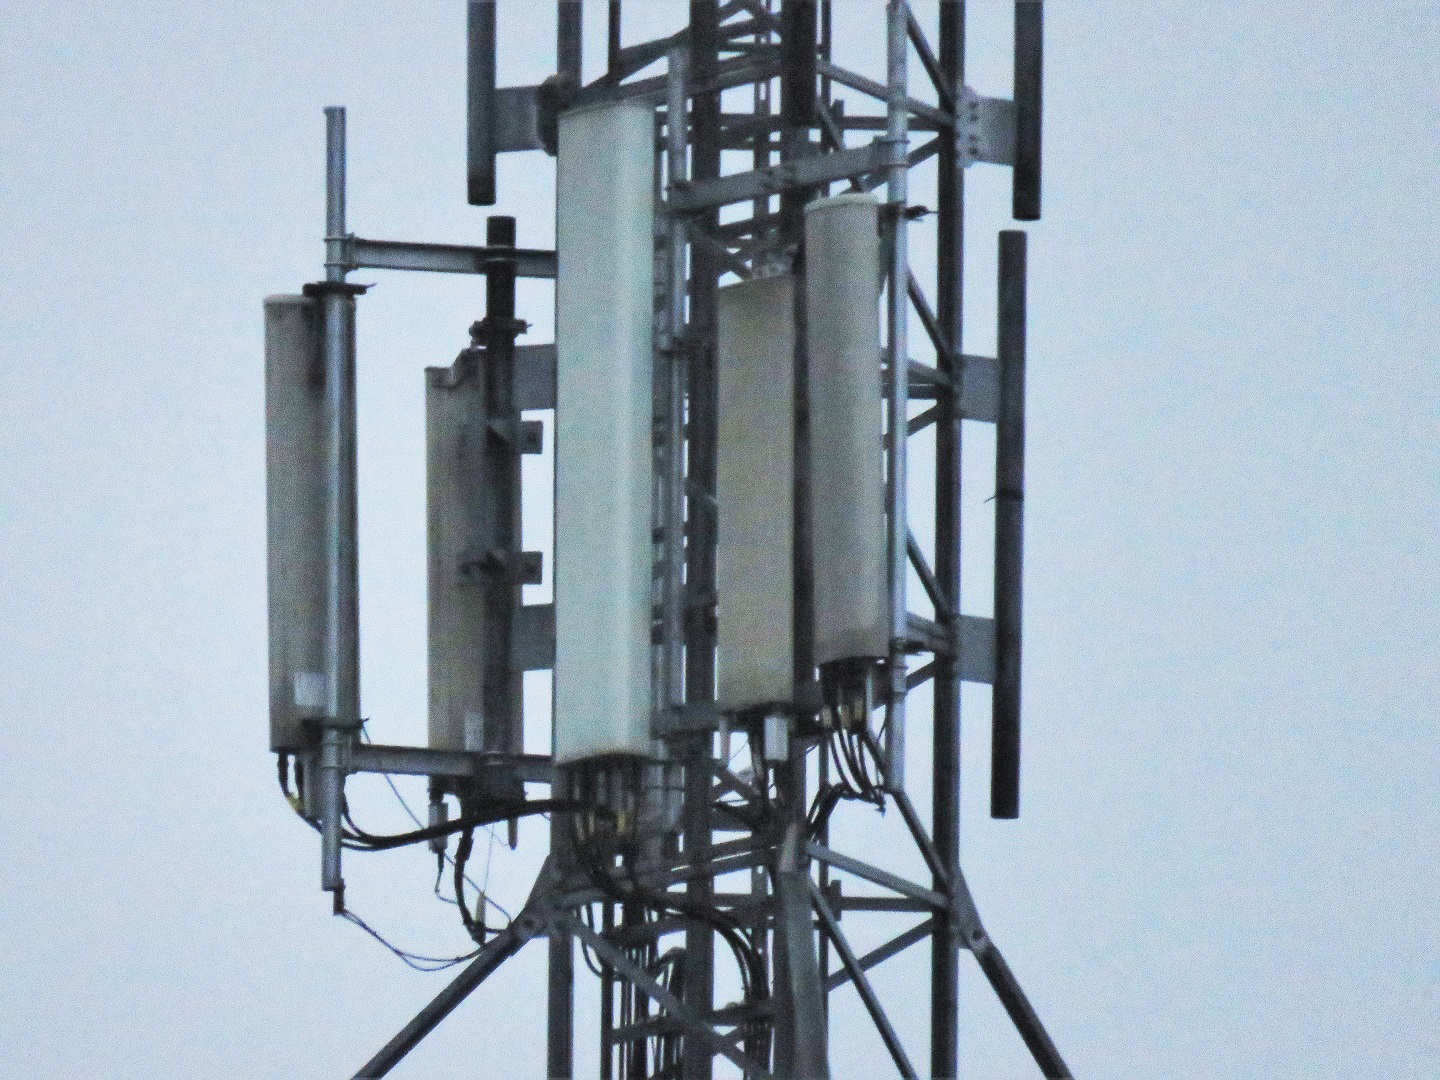 Orange and T-Mobile 4CA site on Ul Głogowska 14 with Huawei, Powerwave and Kathrein antennas and Huawei RRUs.